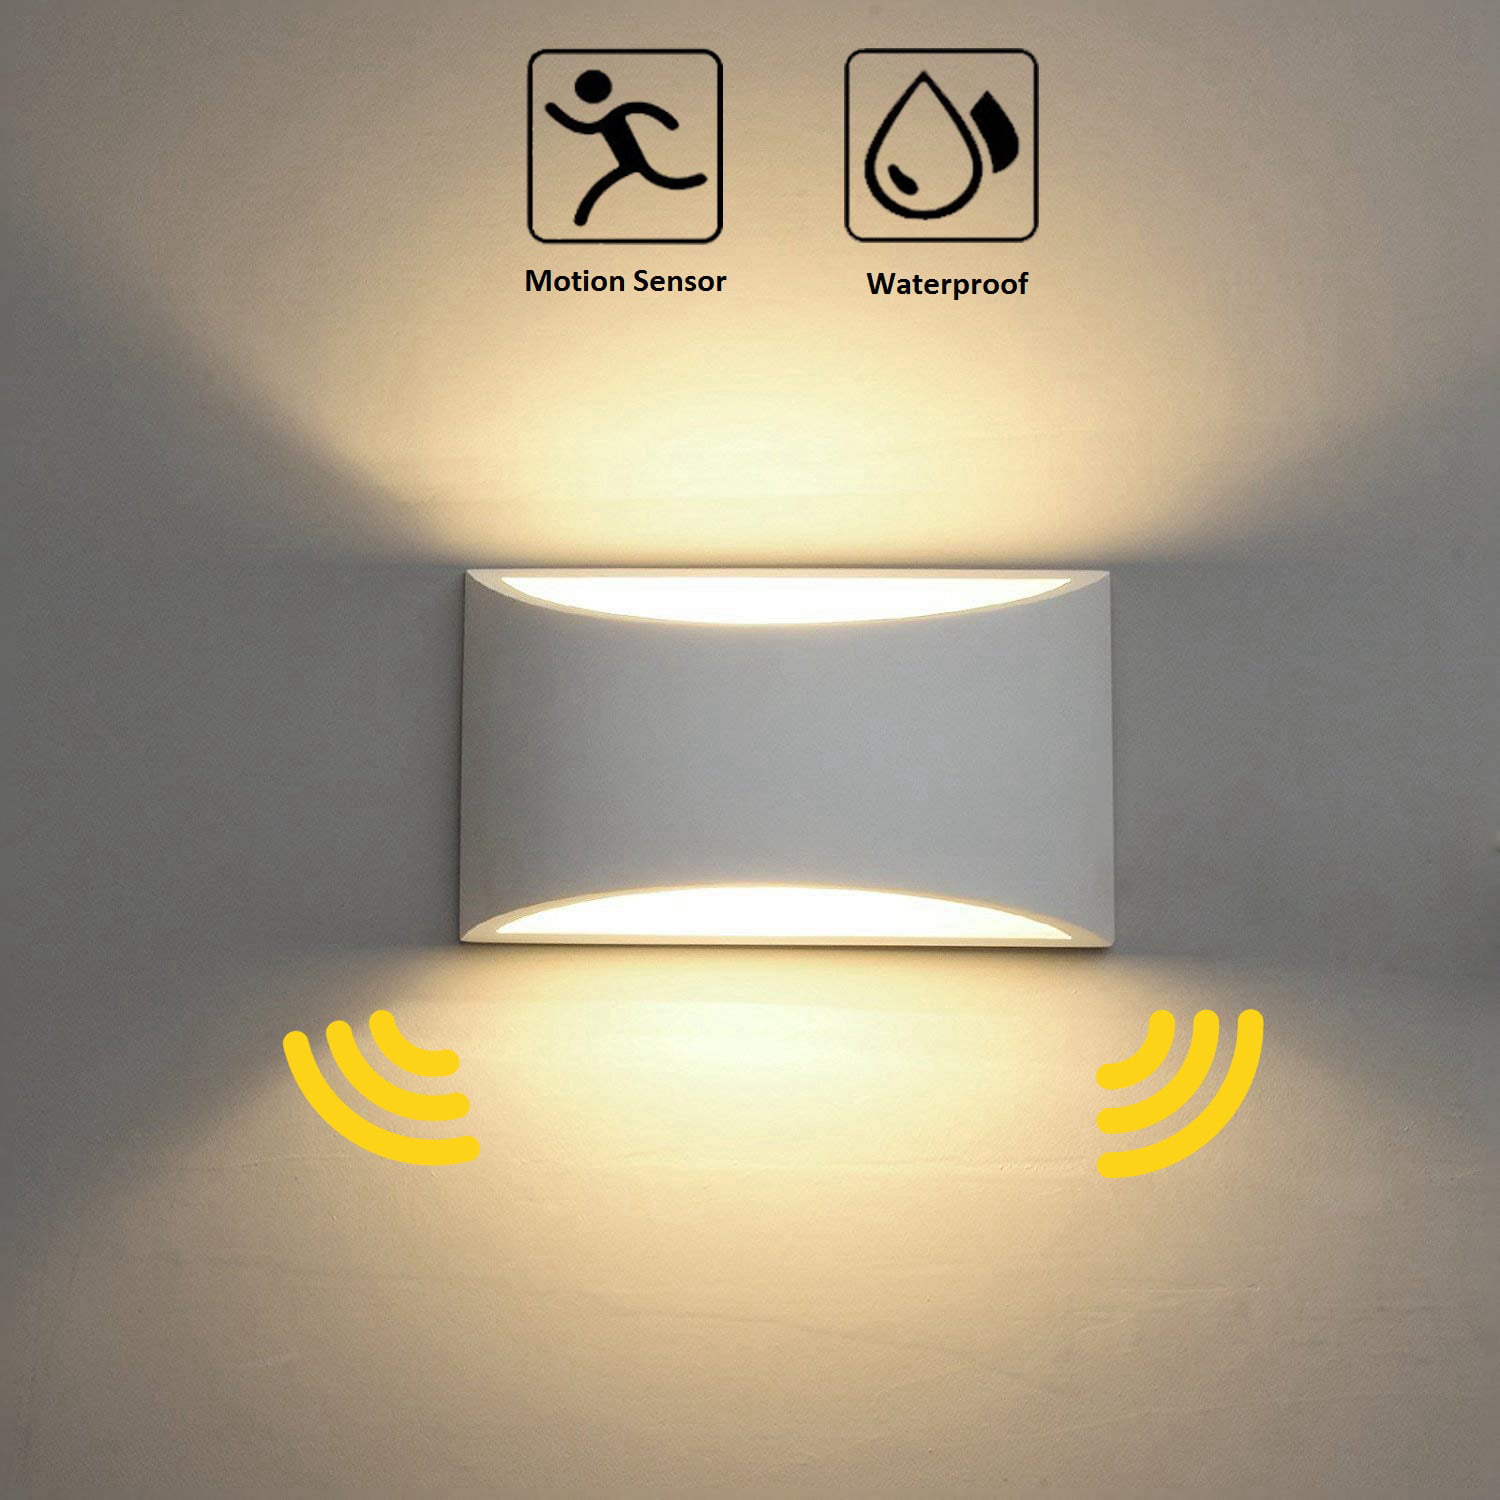 LED Wall Lamp Light Fixture Sconce Bedroom Bedside Living Hallway Stair Decor